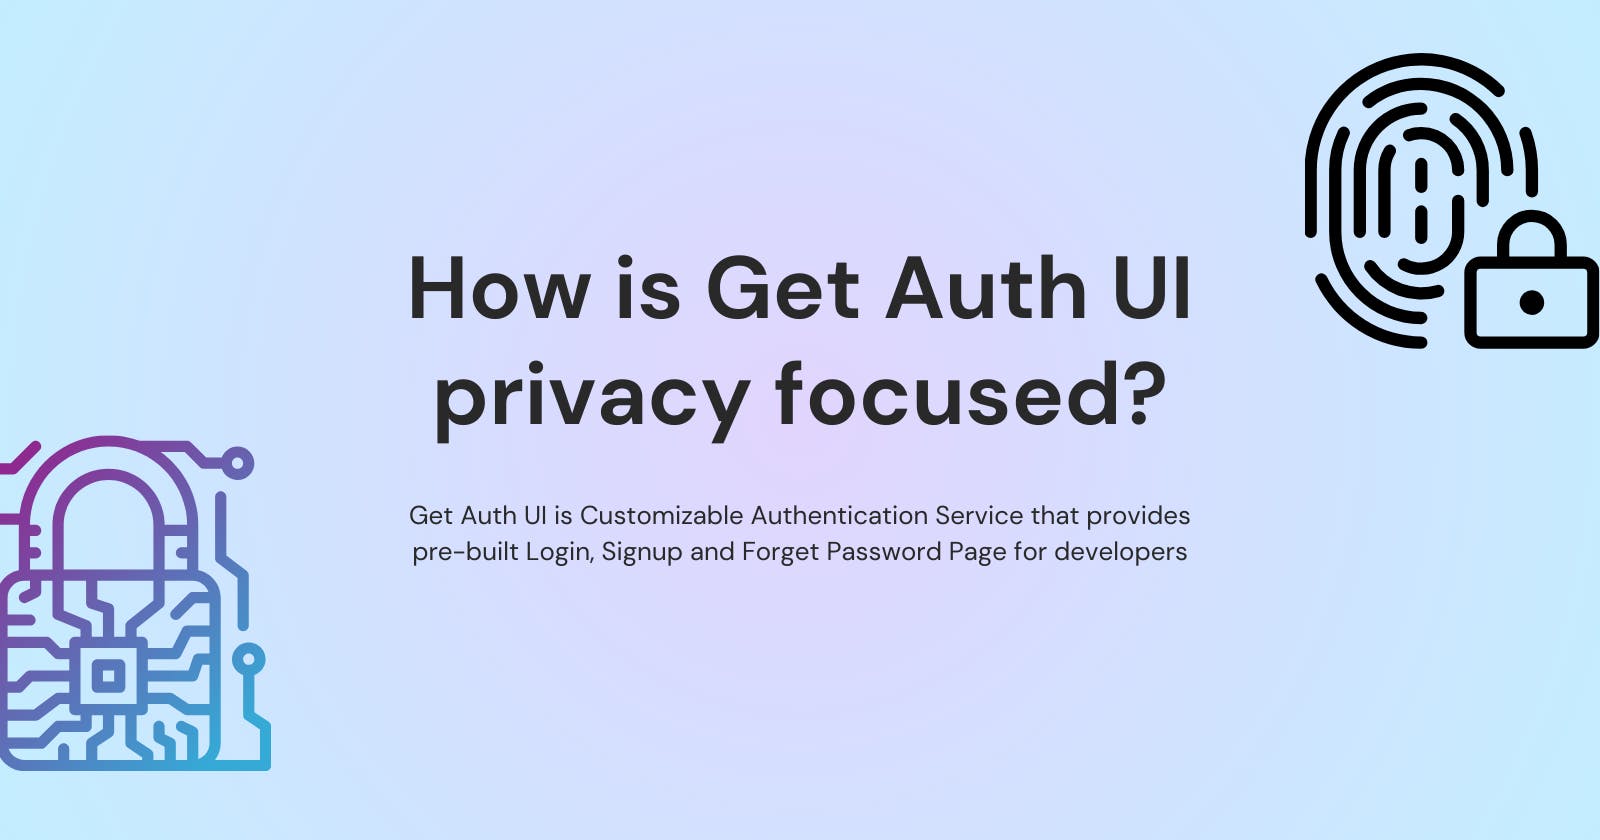 How is Get Auth UI privacy focused?